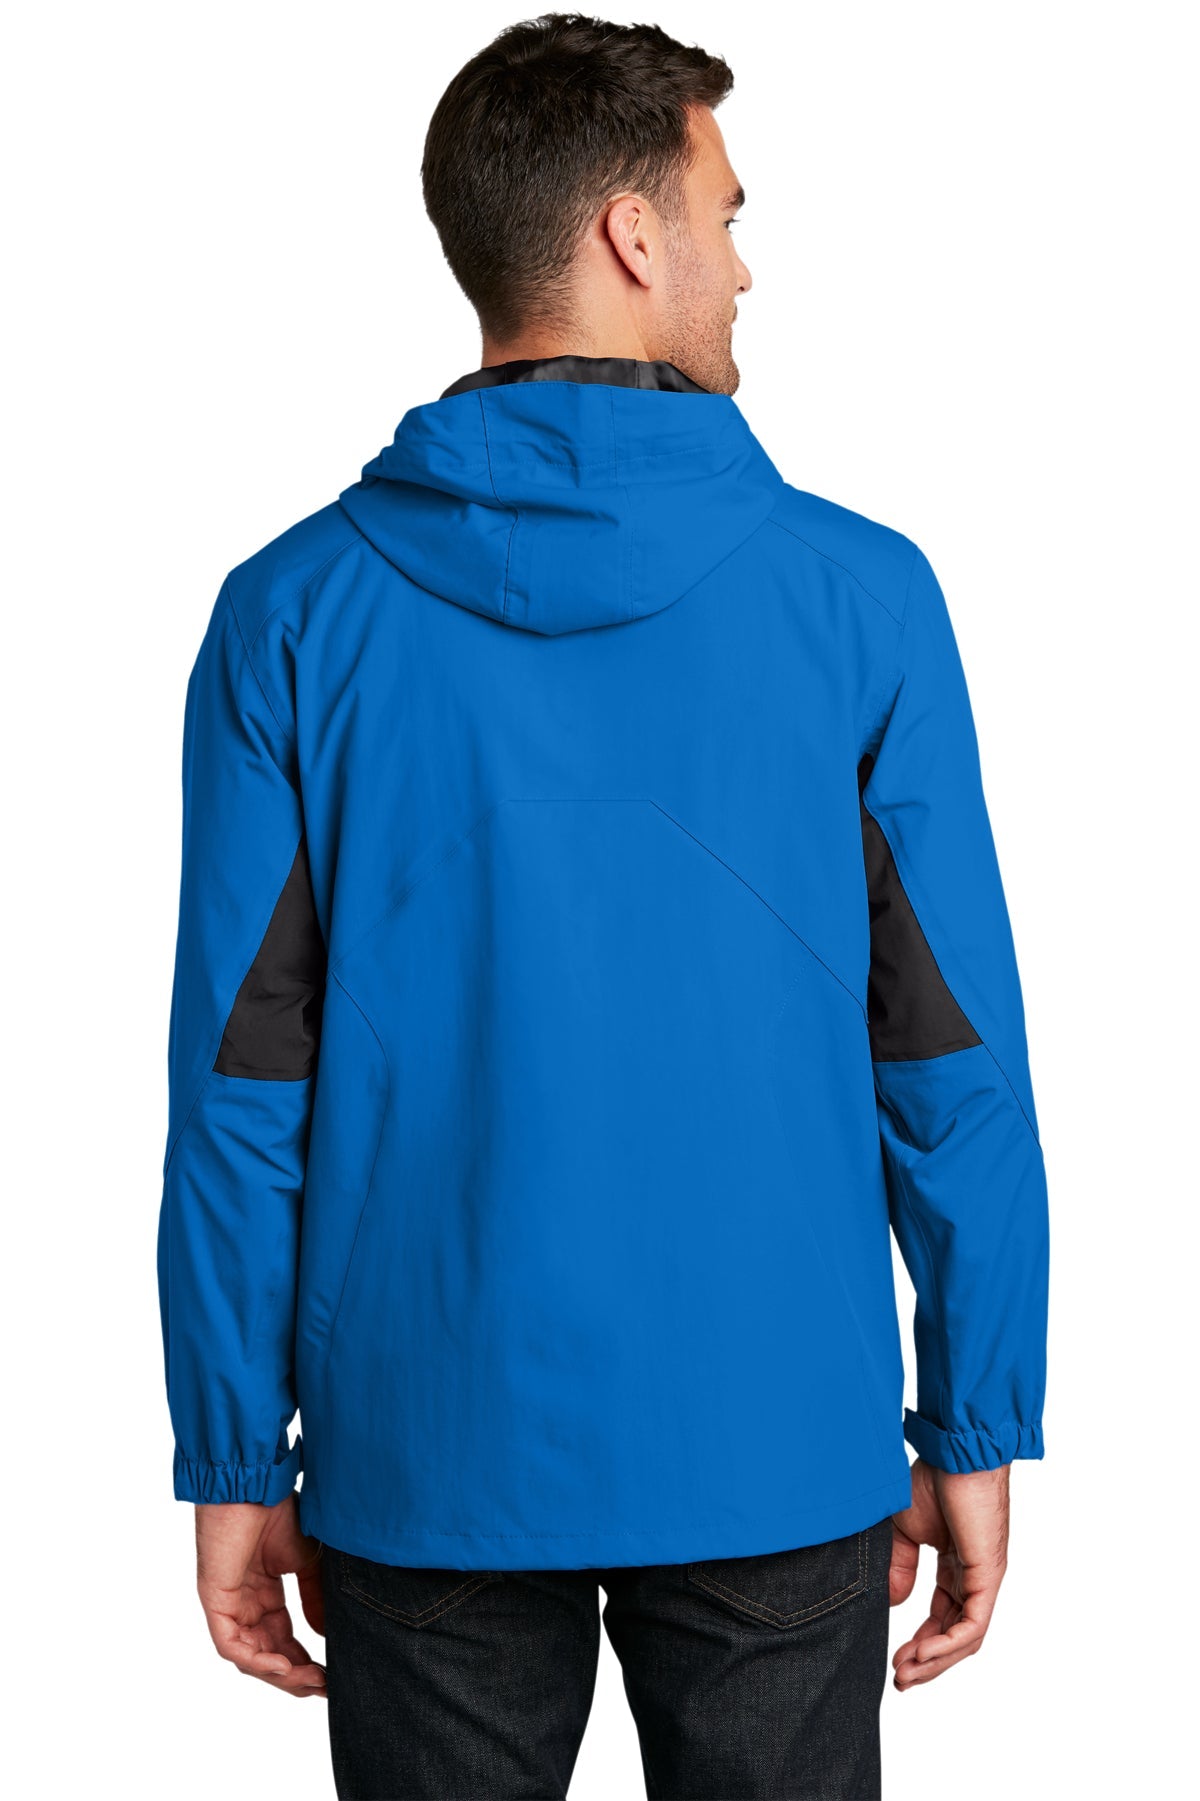 Port Authority Cascade Customized Waterproof Jackets, Imperial Blue/ Black